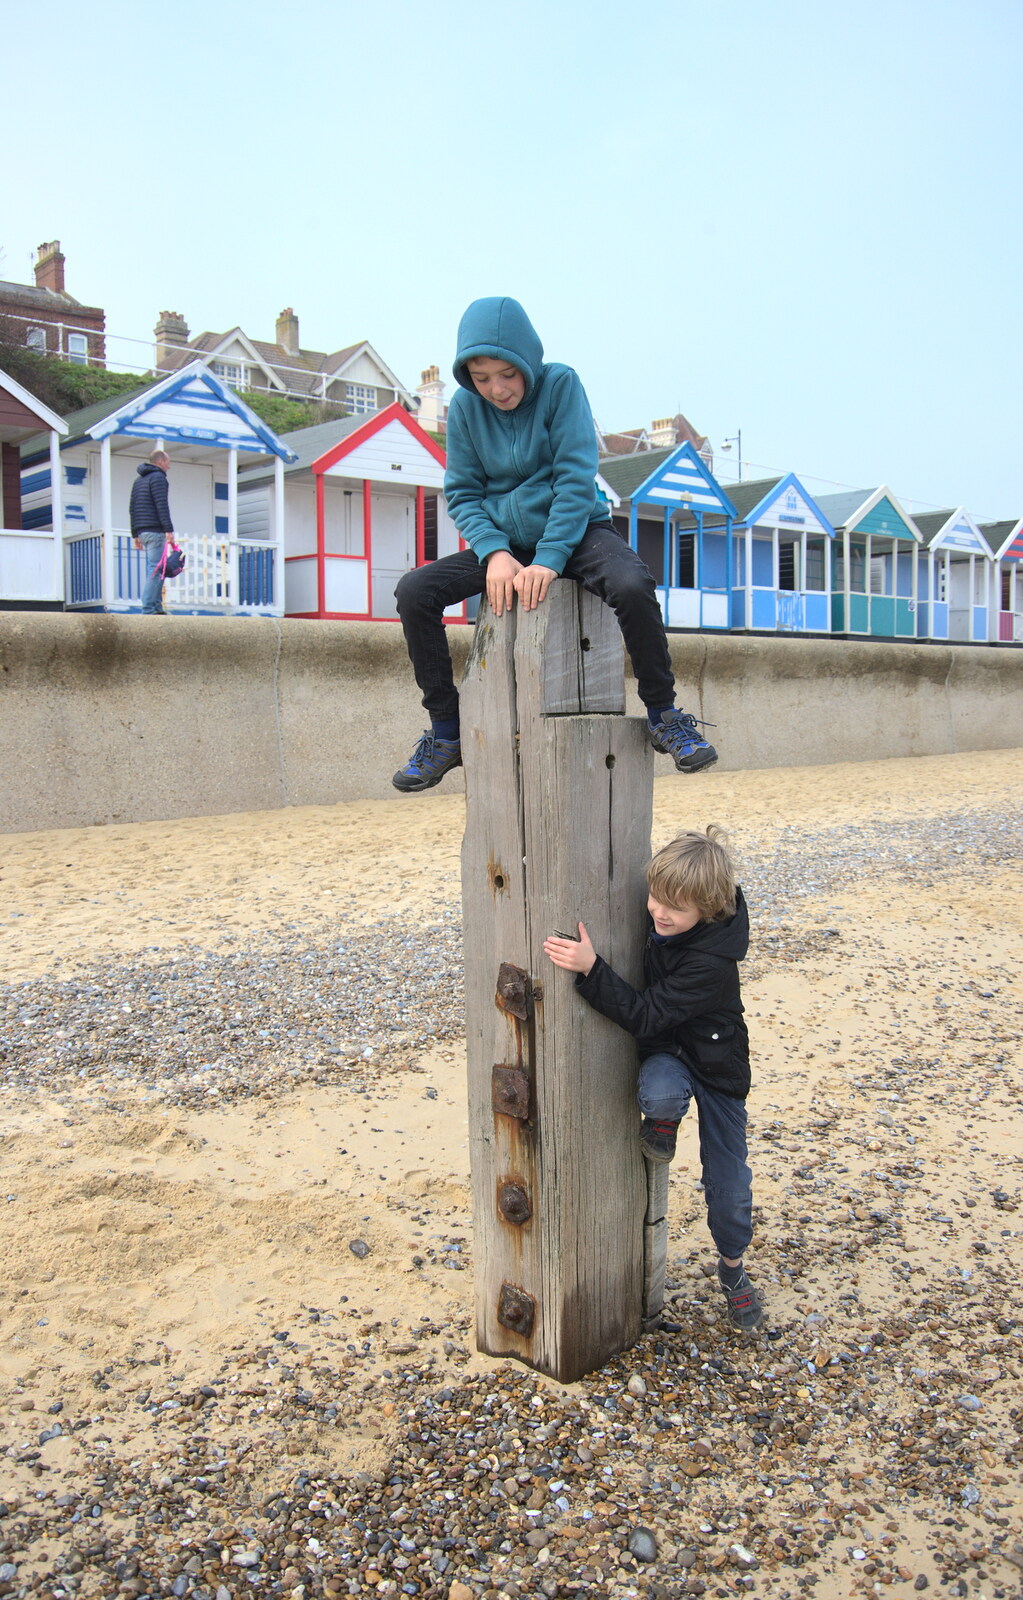 The boys on a wooden stump from On The Beach, Southwold, Suffolk - 7th April 2019